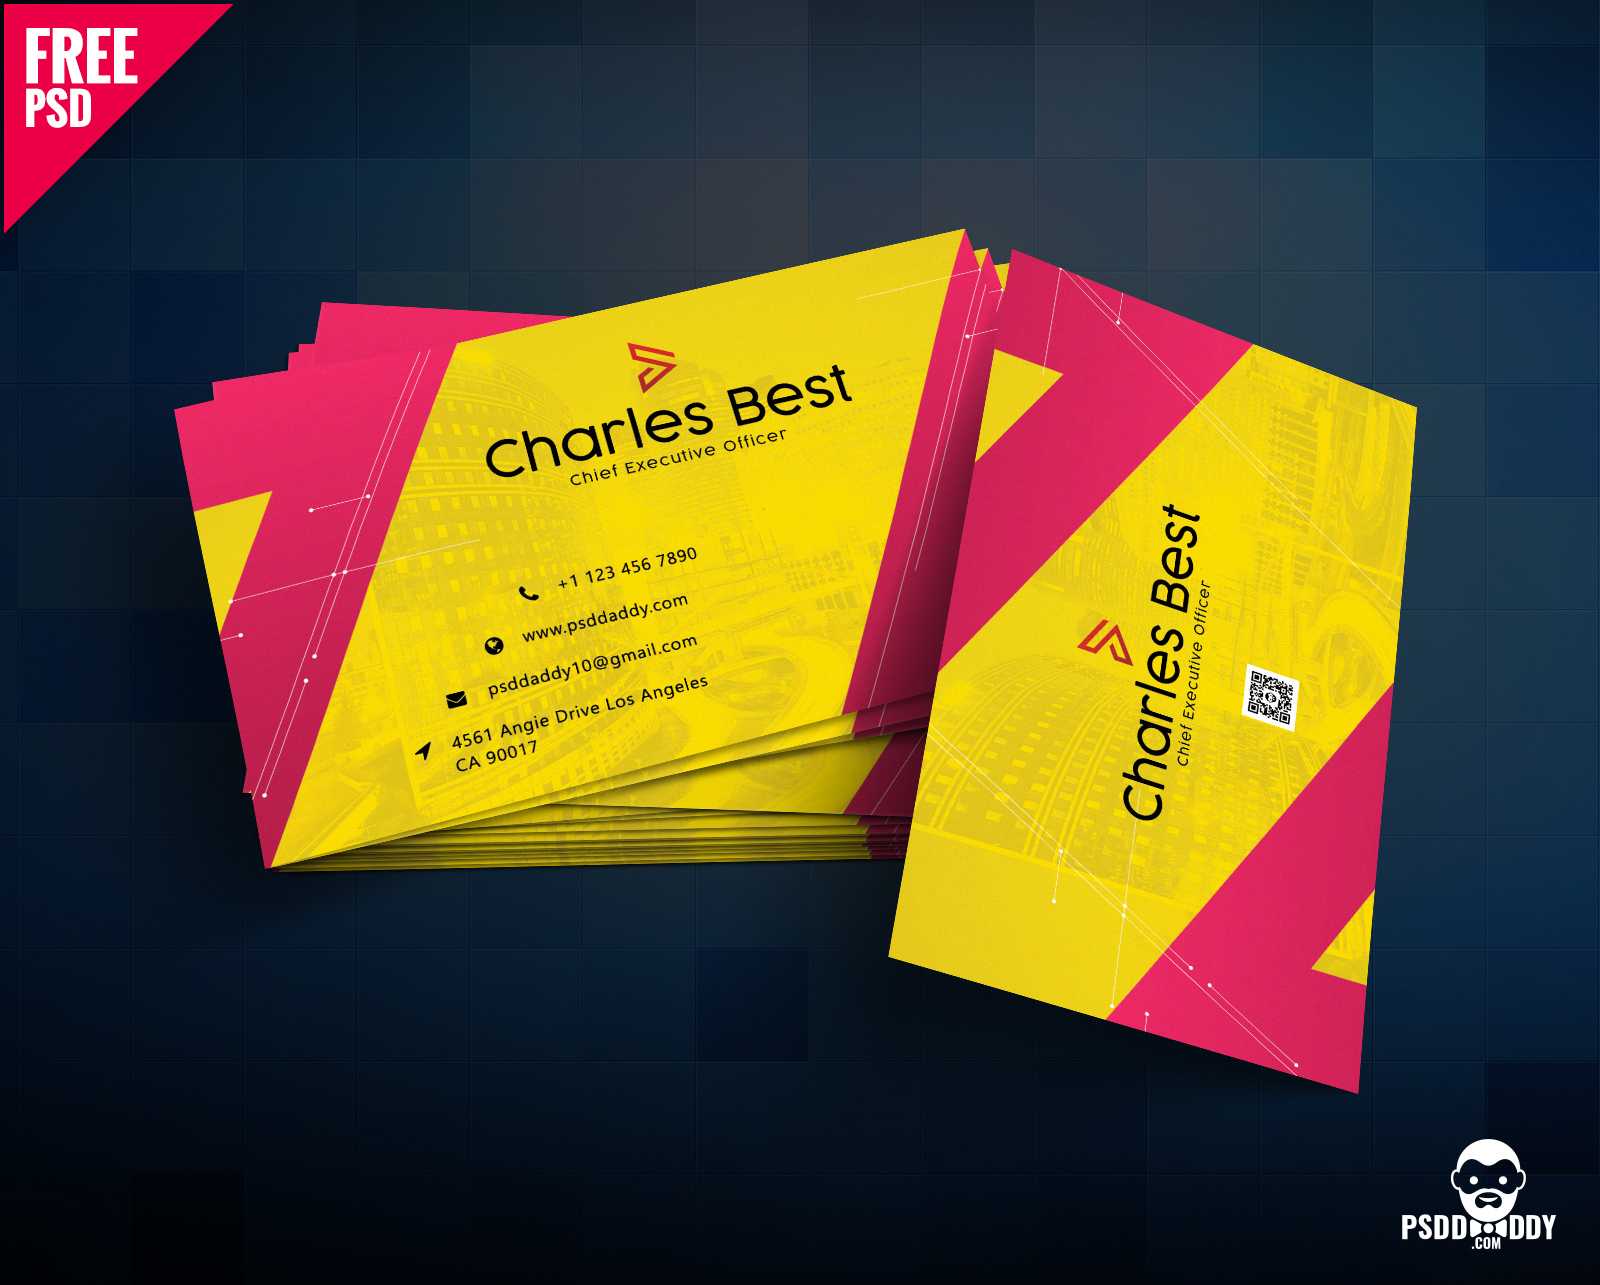 Download] Creative Business Card Free Psd | Psddaddy Intended For Business Card Maker Template